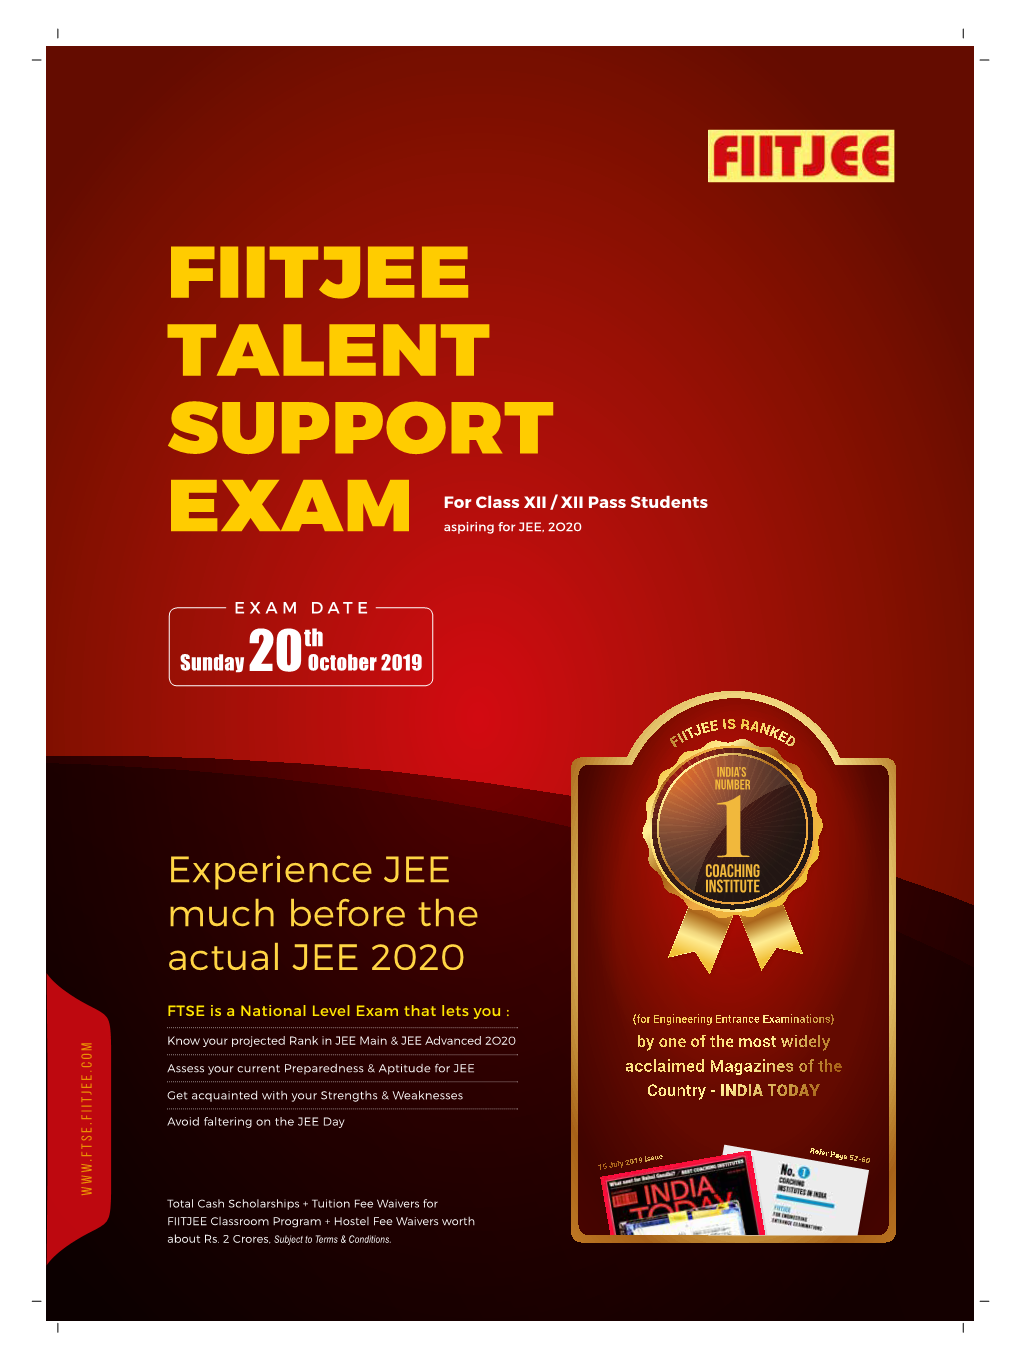 FIITJEE Talent Support Exam (FTSE) 2 Why FTSE Is Important for You & Your Coaching Institute 3 the Road Map to Your Destination 4